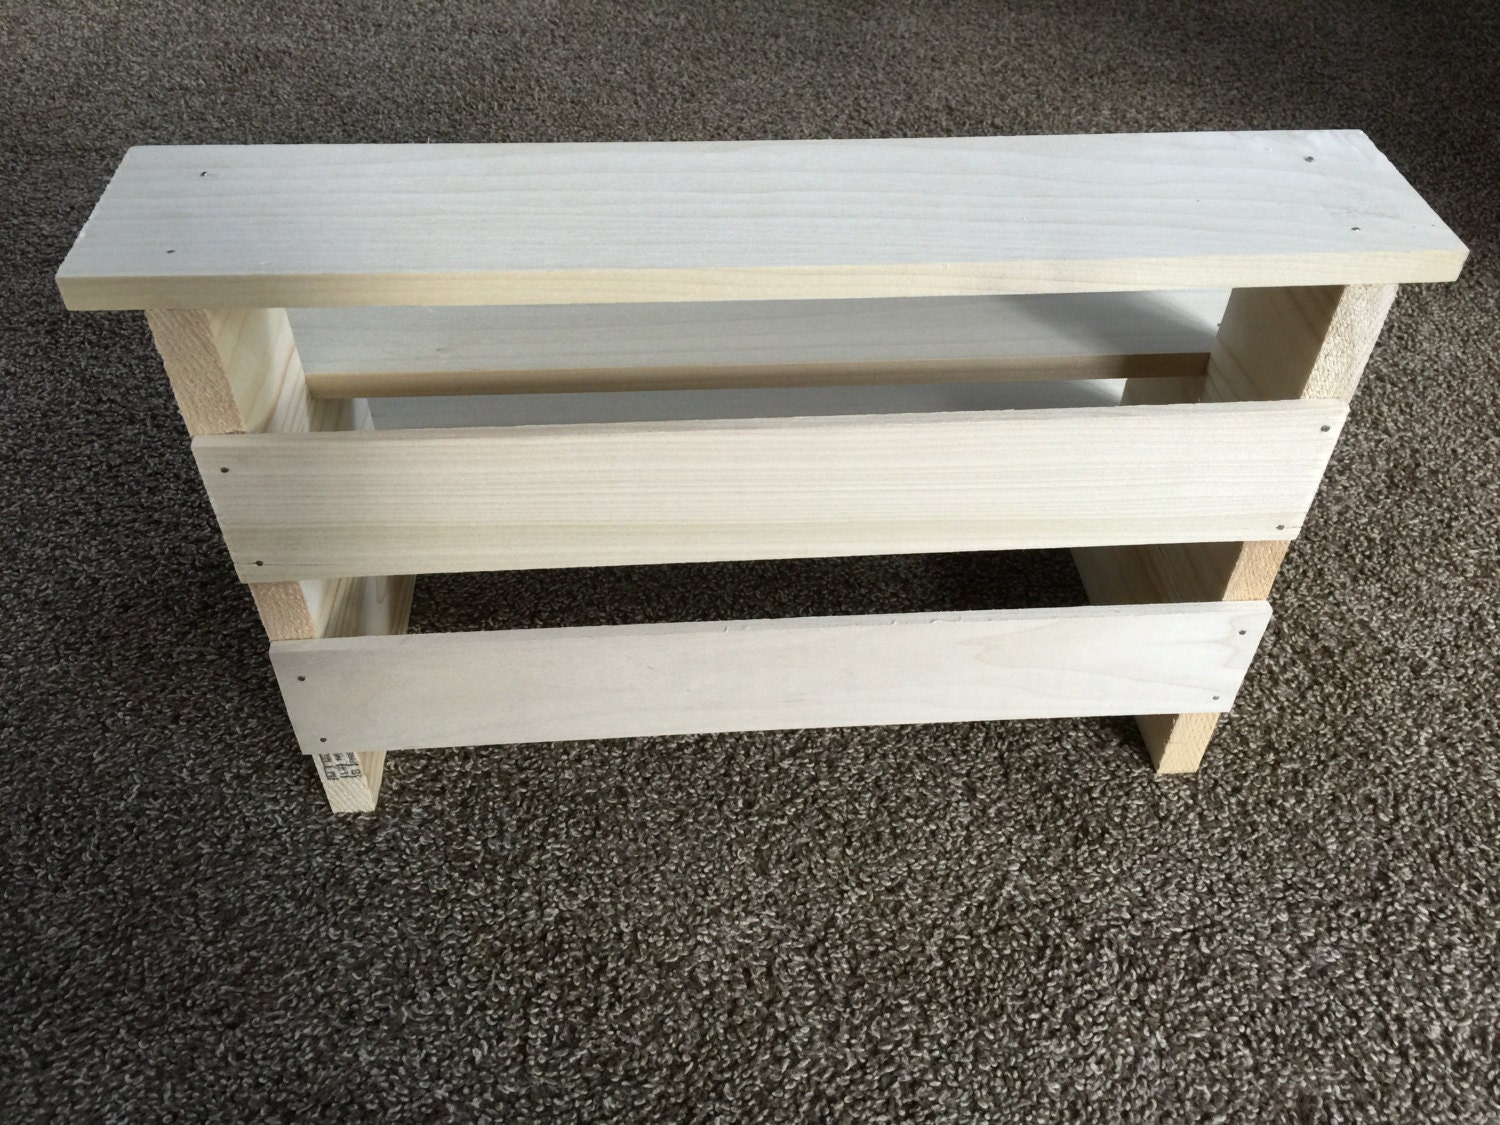 Unfinished Wood Soap or Product Display Shelf, Craft Show Display